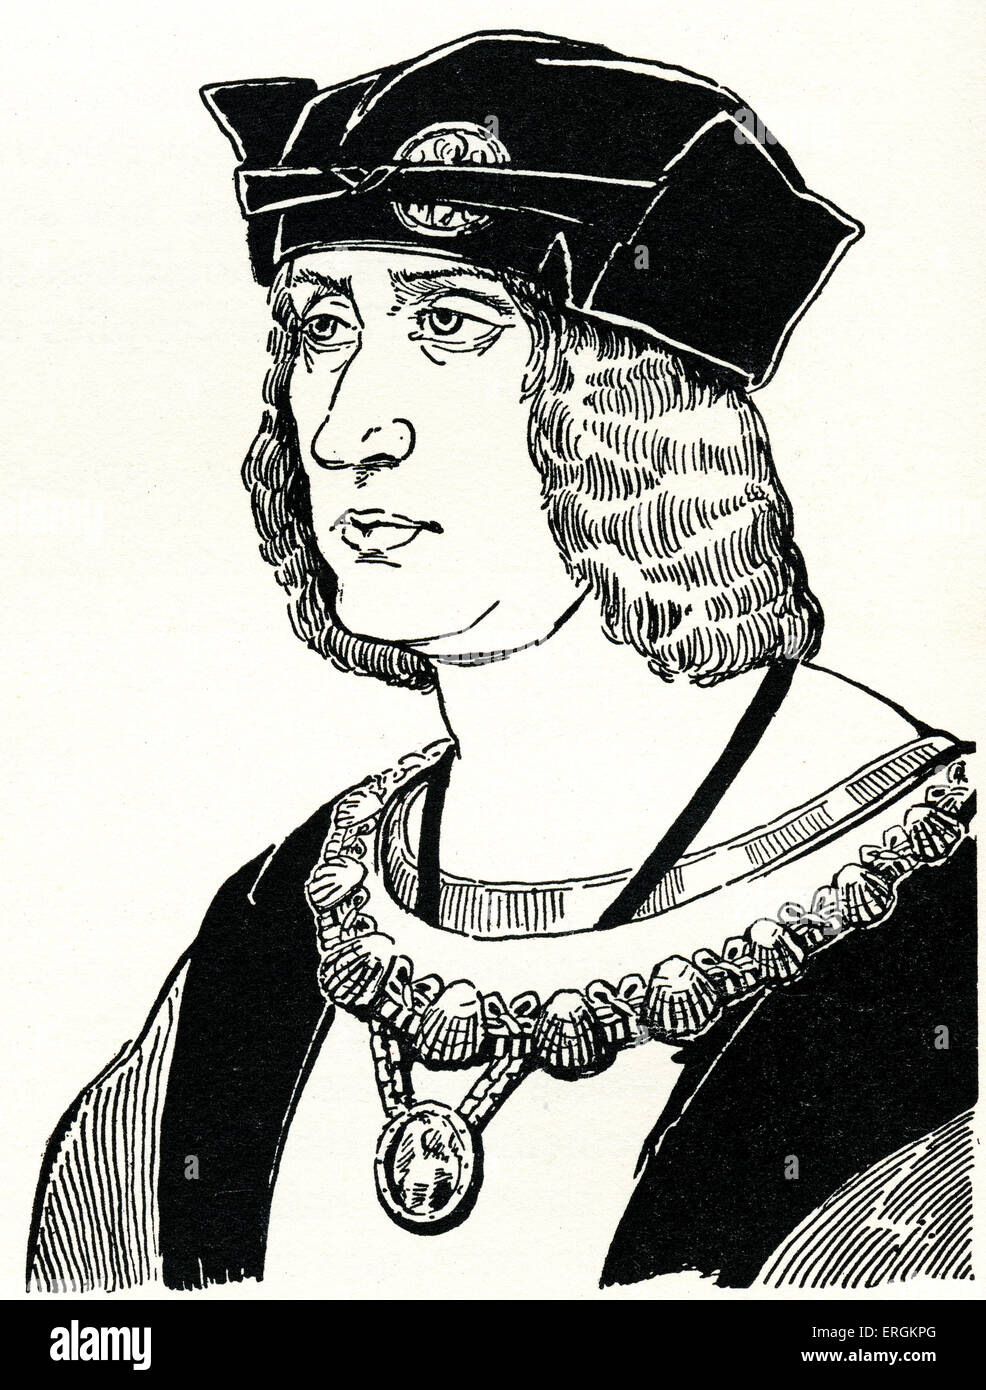 King Louis XII (1462 - 1515). Ruled as King of France from 1498 to 1515 and King of Naples from 1501 to 1504. Based on engraving by Jehen Perreal (c.1450 - 1530). Herbert Norris artist died 1950 - may require copyright clearance Stock Photo